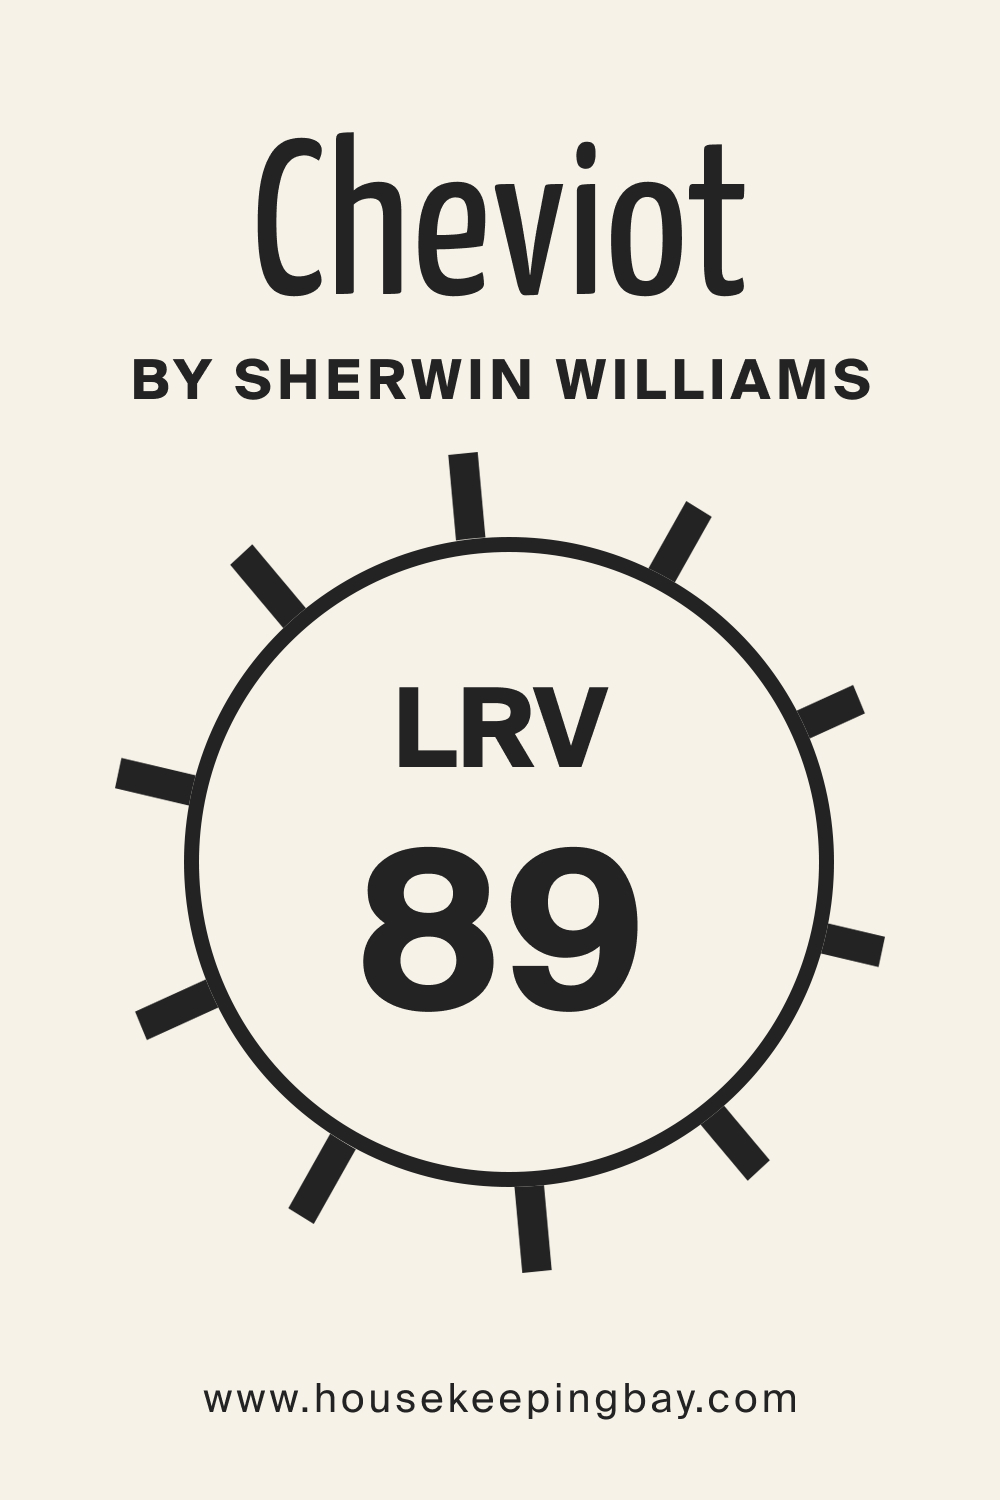 SW 9503 Cheviot by Sherwin Williams. LRV 89